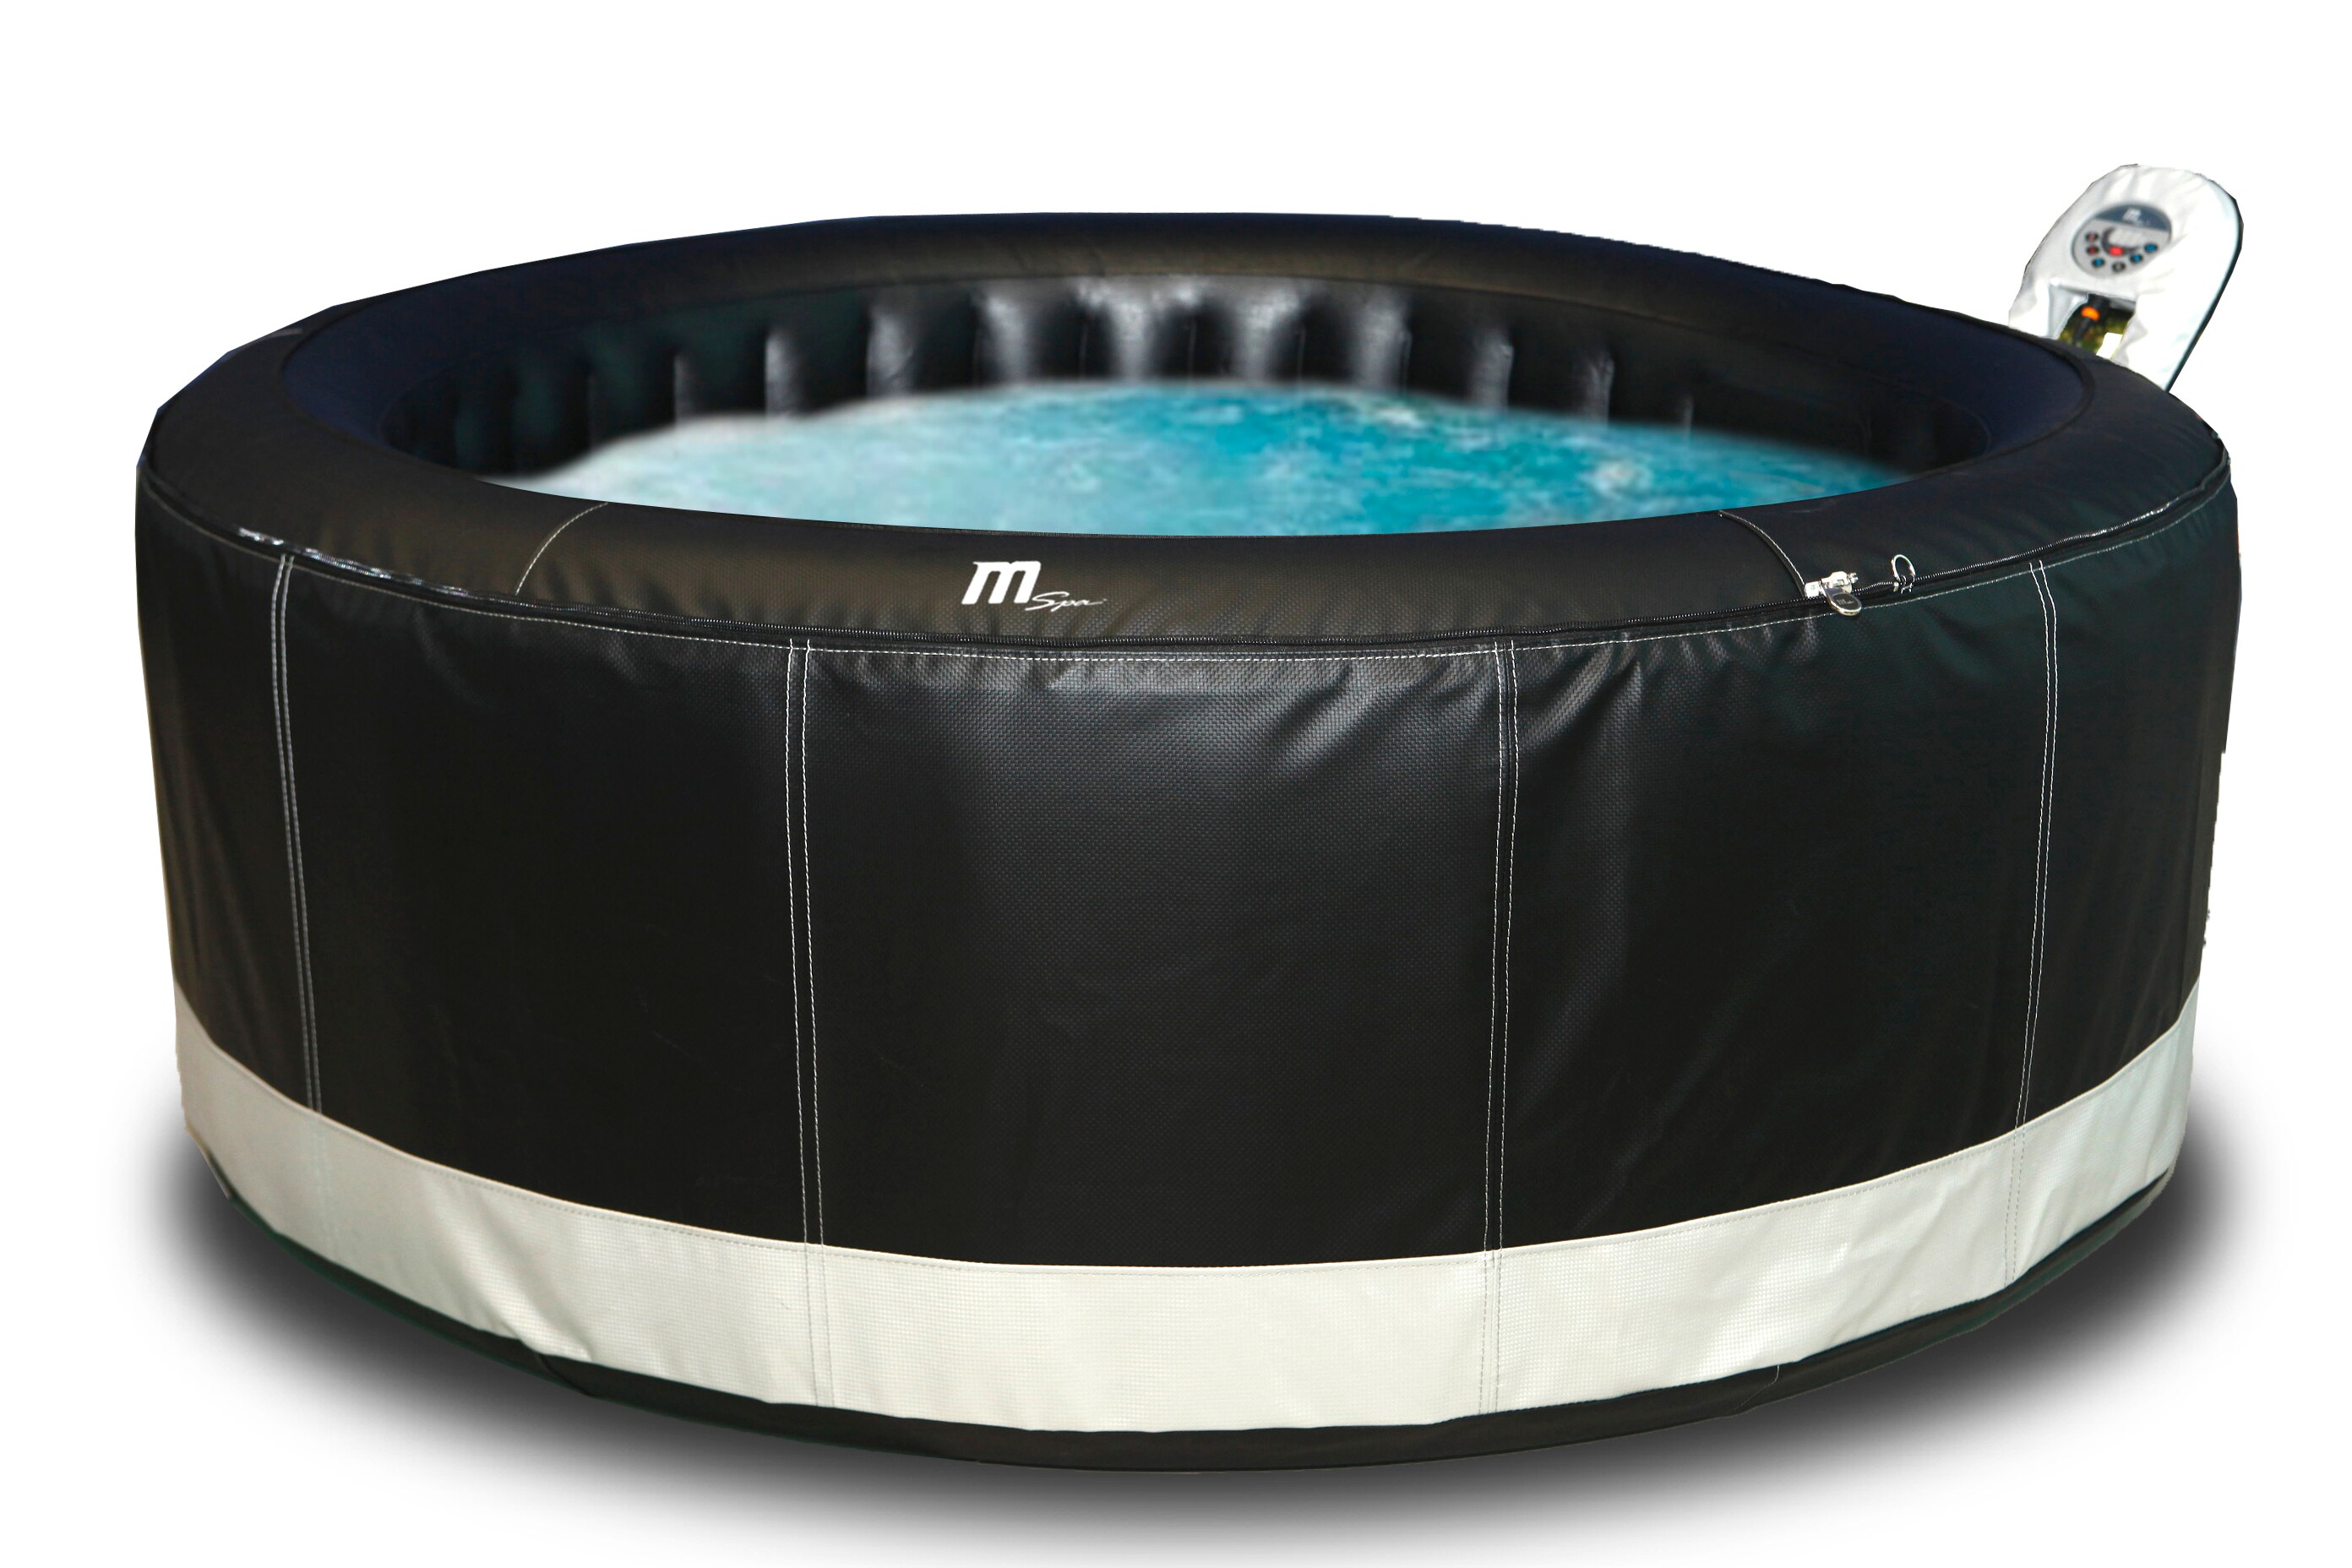 Mspa Inflatable hot tub 6 Person Round Blue Spa With UVC Sanitizer Most Hygiene 5056141040103 